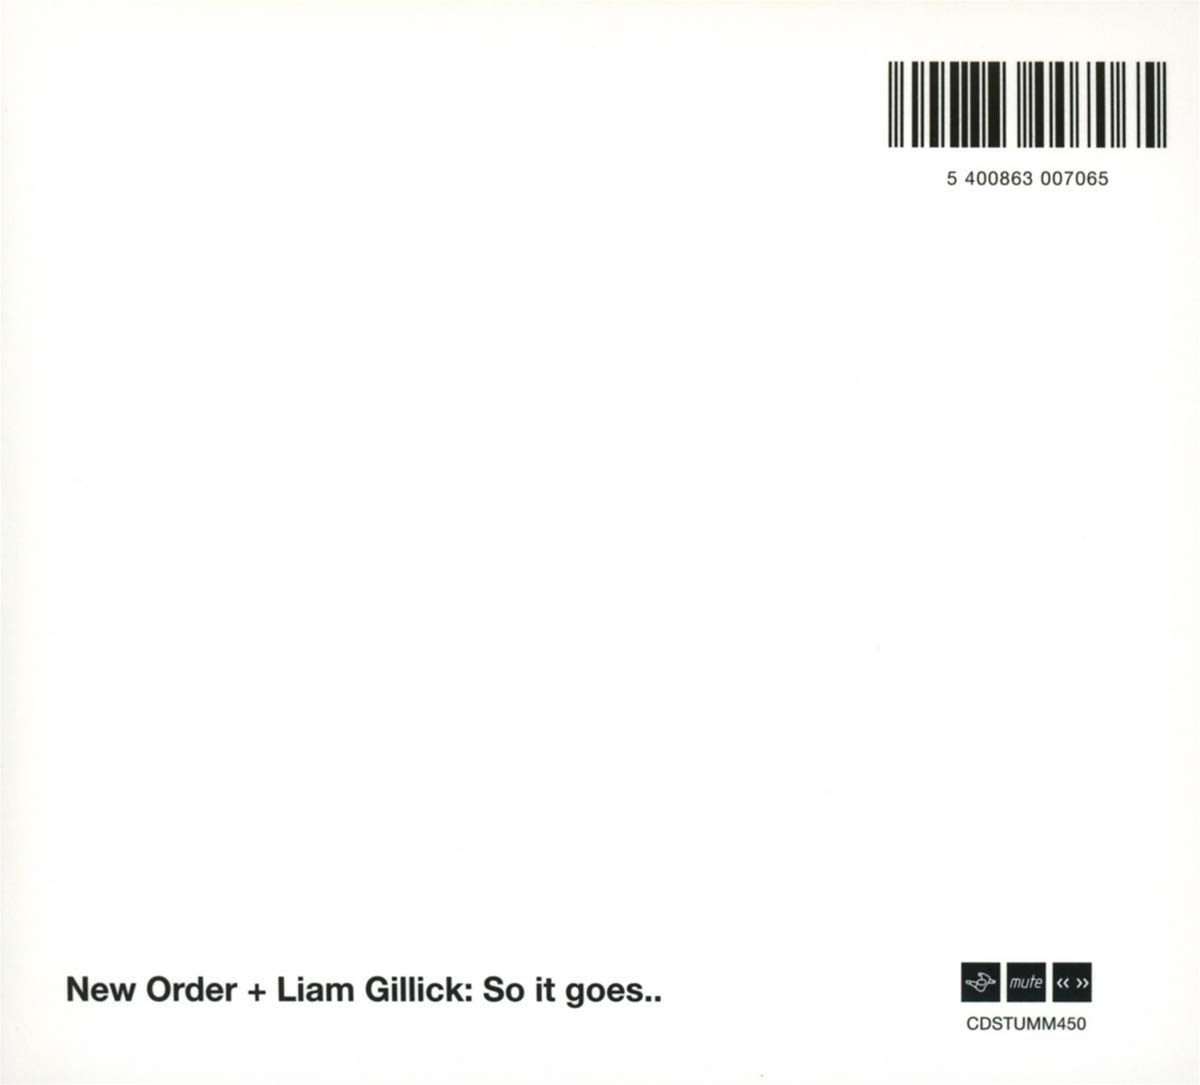 New Order (뉴 오더) - ∑(No,12k,Lg,17Mif) New Order + Liam Gillick: So it goes..